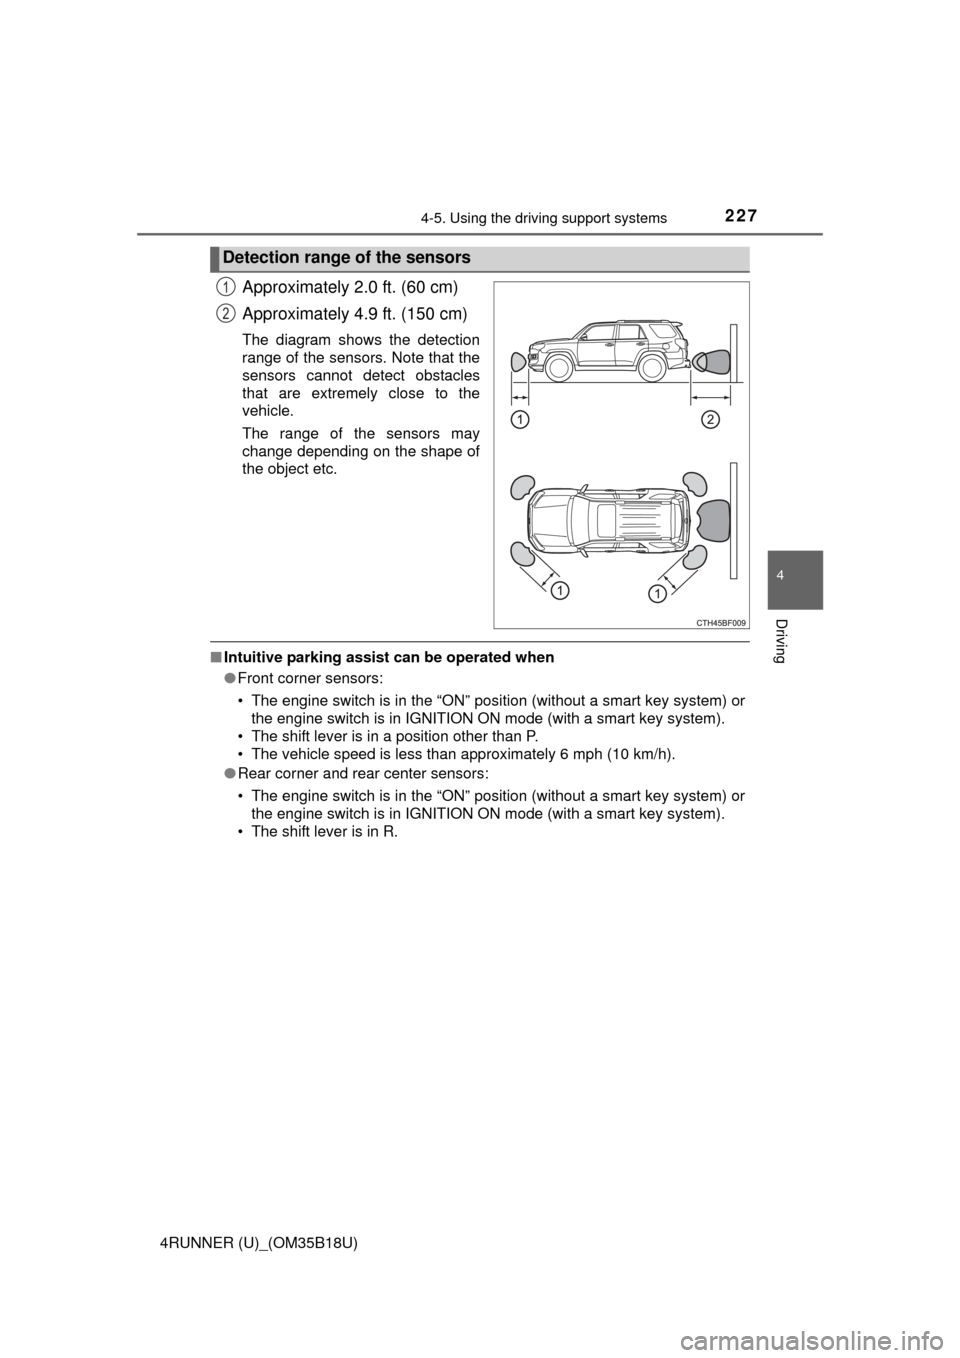 TOYOTA 4RUNNER 2015 N280 / 5.G Owners Manual 2274-5. Using the driving support systems
4
Driving
4RUNNER (U)_(OM35B18U)
Approximately 2.0 ft. (60 cm)
Approximately 4.9 ft. (150 cm)
The diagram shows the detection
range of the sensors. Note that 